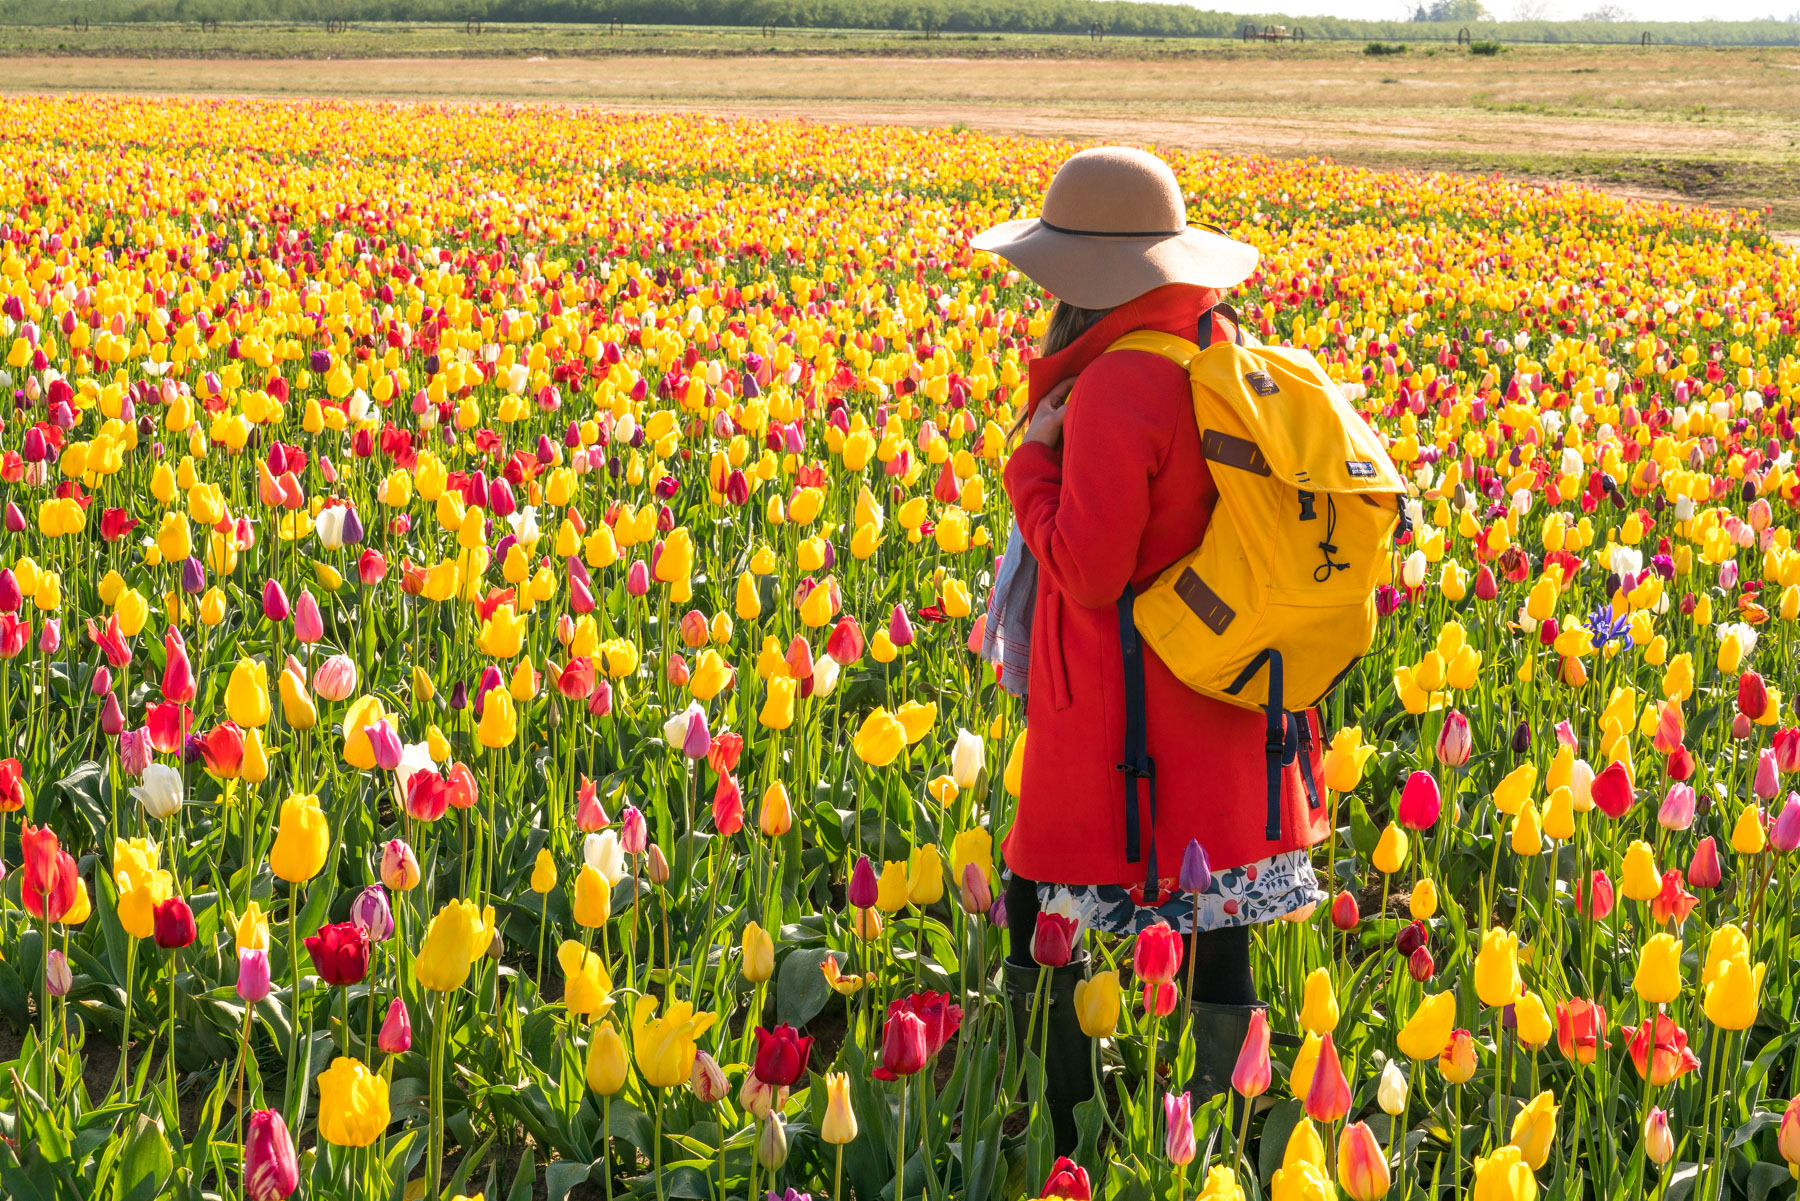 sea of tulips at Wooden Shoe Tulip Festival